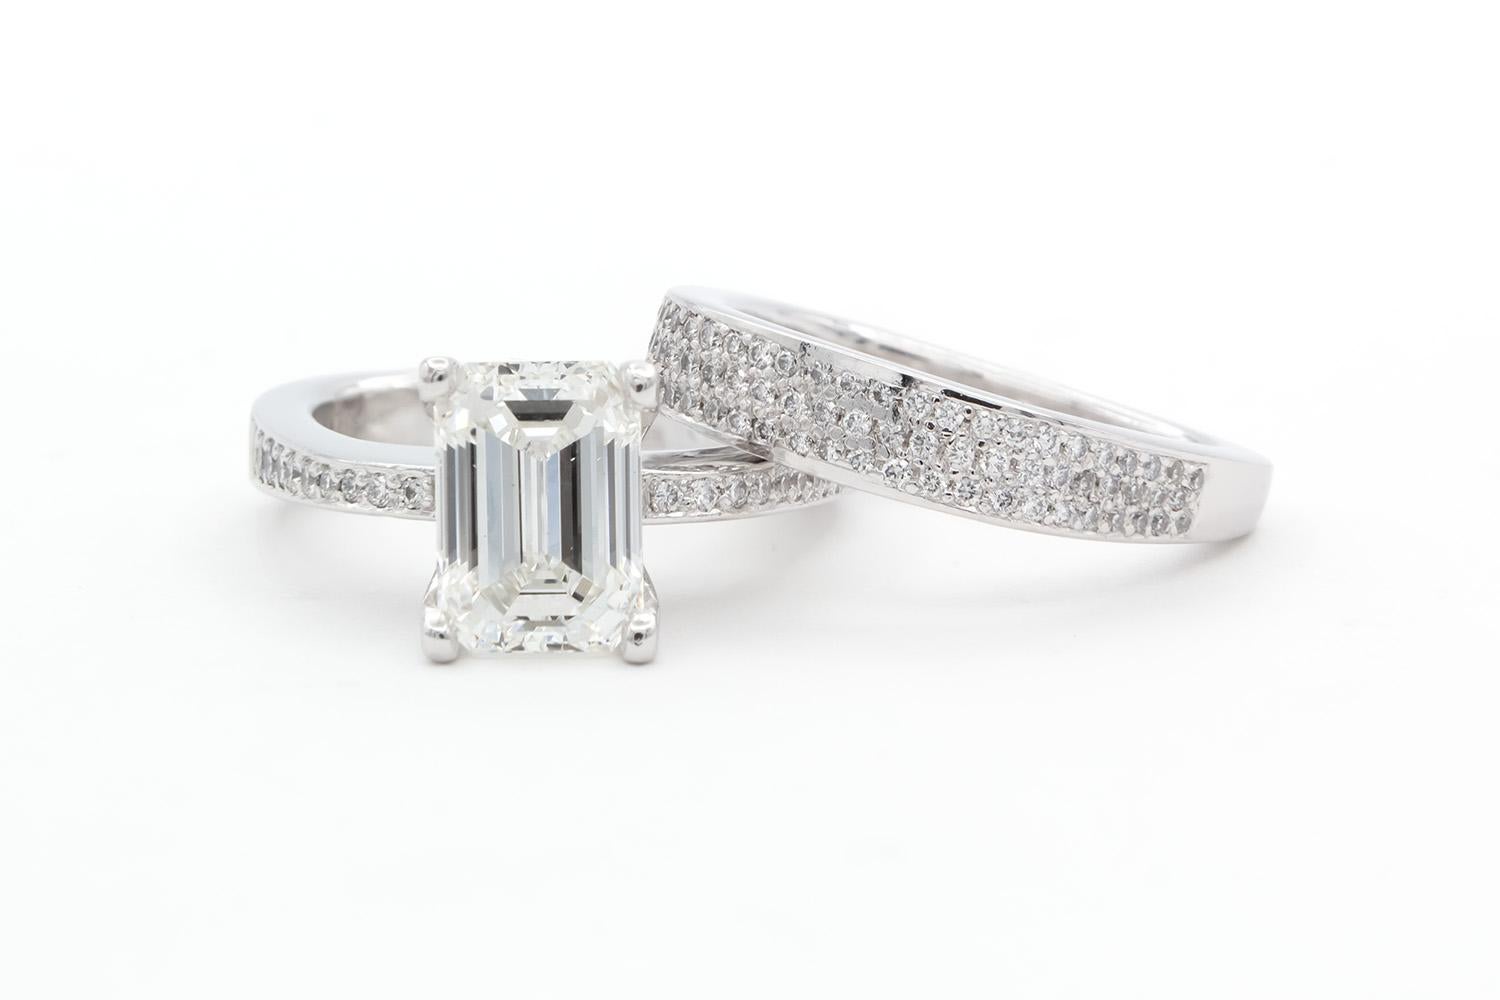 We are pleased to offer this Stuart Moore GIA Certified Platinum & Emerald Cut Diamond Engagement Ring Set . This beautiful engagement set features a GIA certified 2.14ct F/VS2 emerald cut diamond accented by an estimated 0.18ctw round brilliant cut